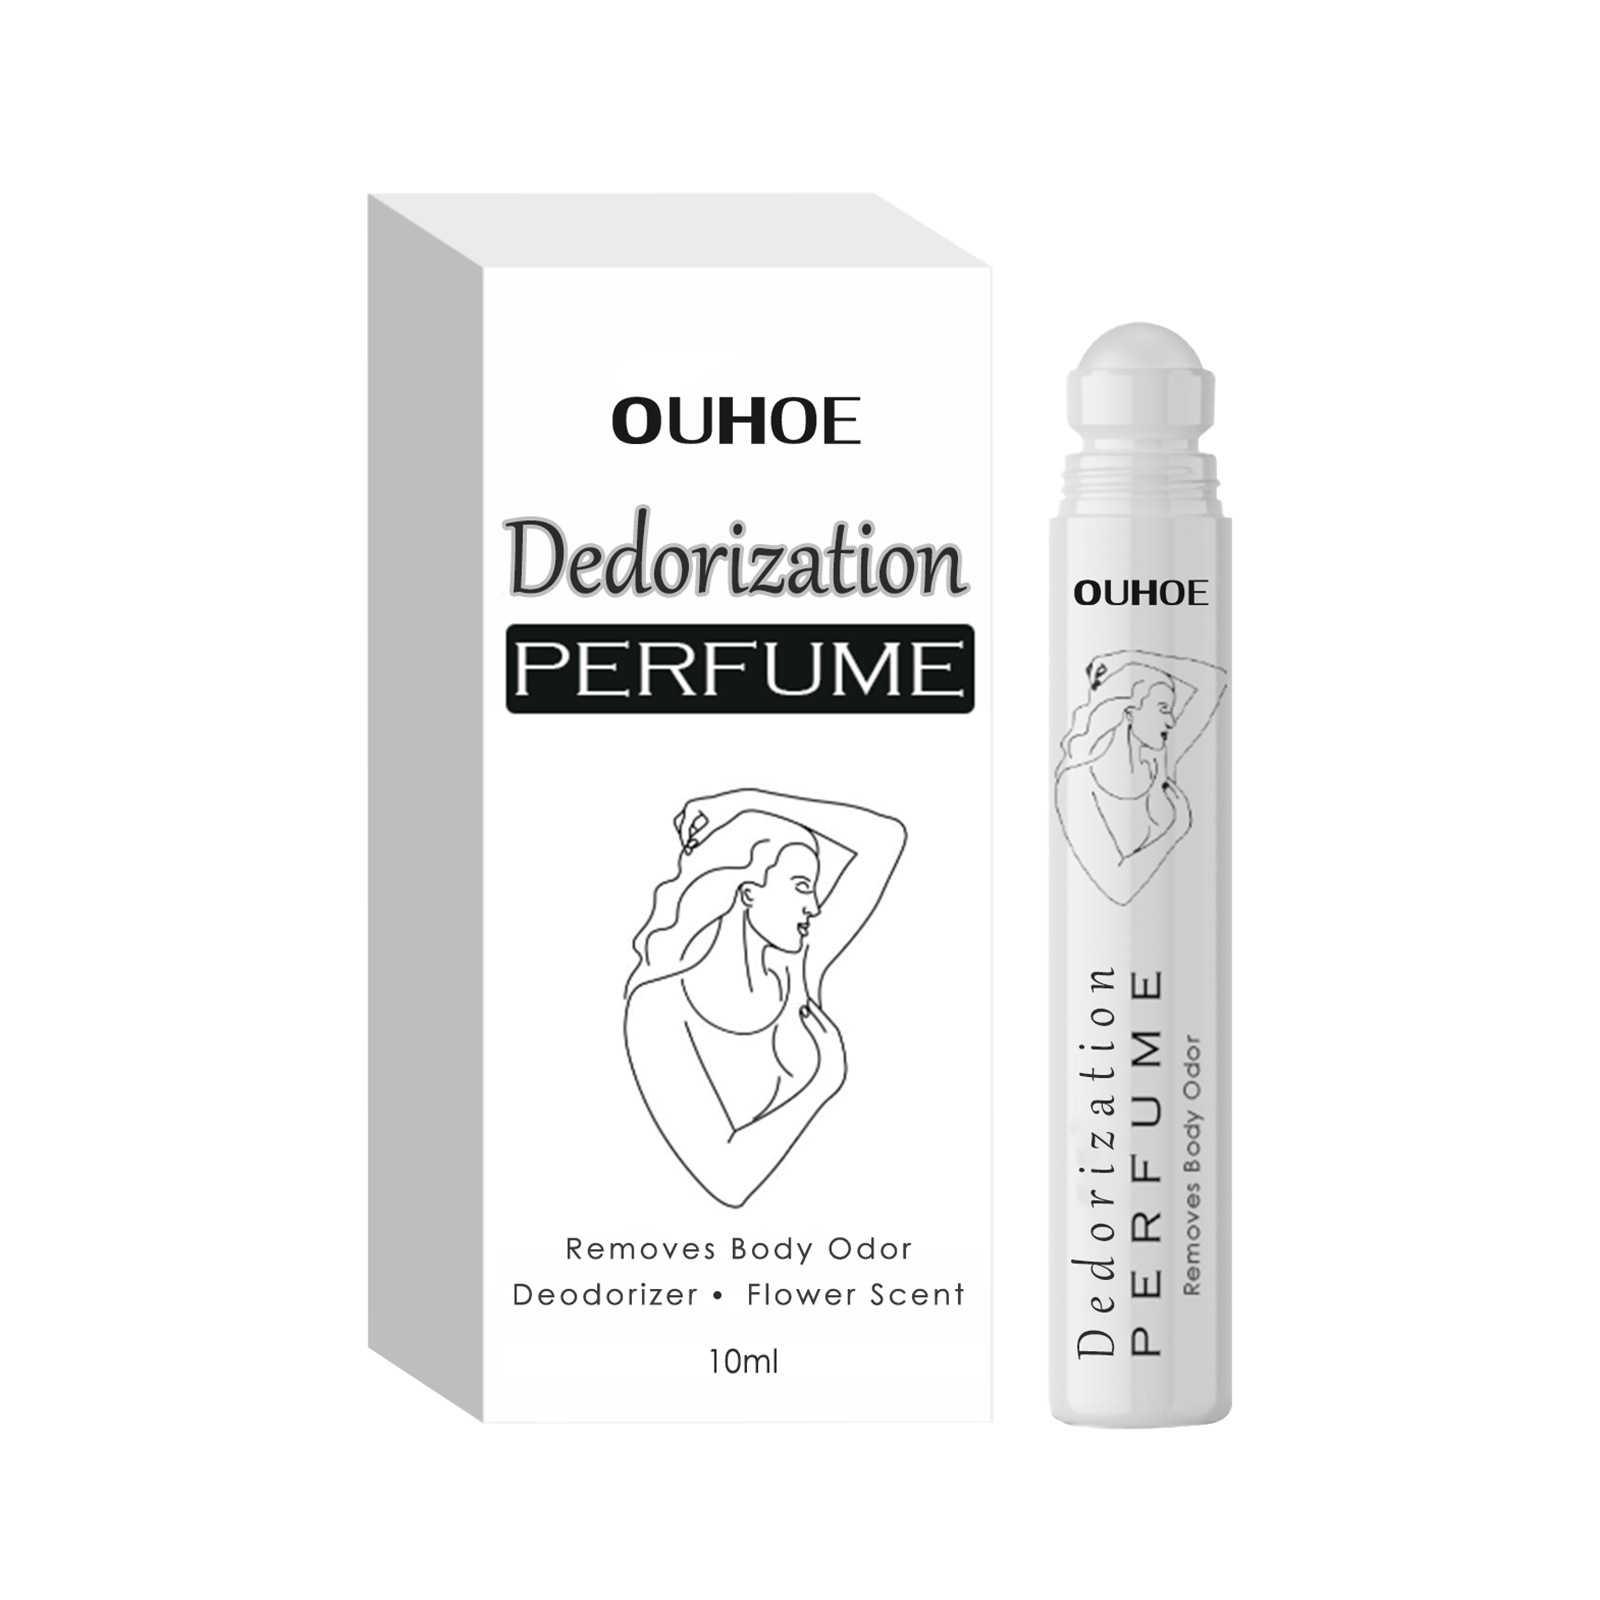 Ouhoe Deodorant Perfume Ball Relieving Armpit Body Odor Refreshing Antiperspirant Natural Fragrance Portable Perfume